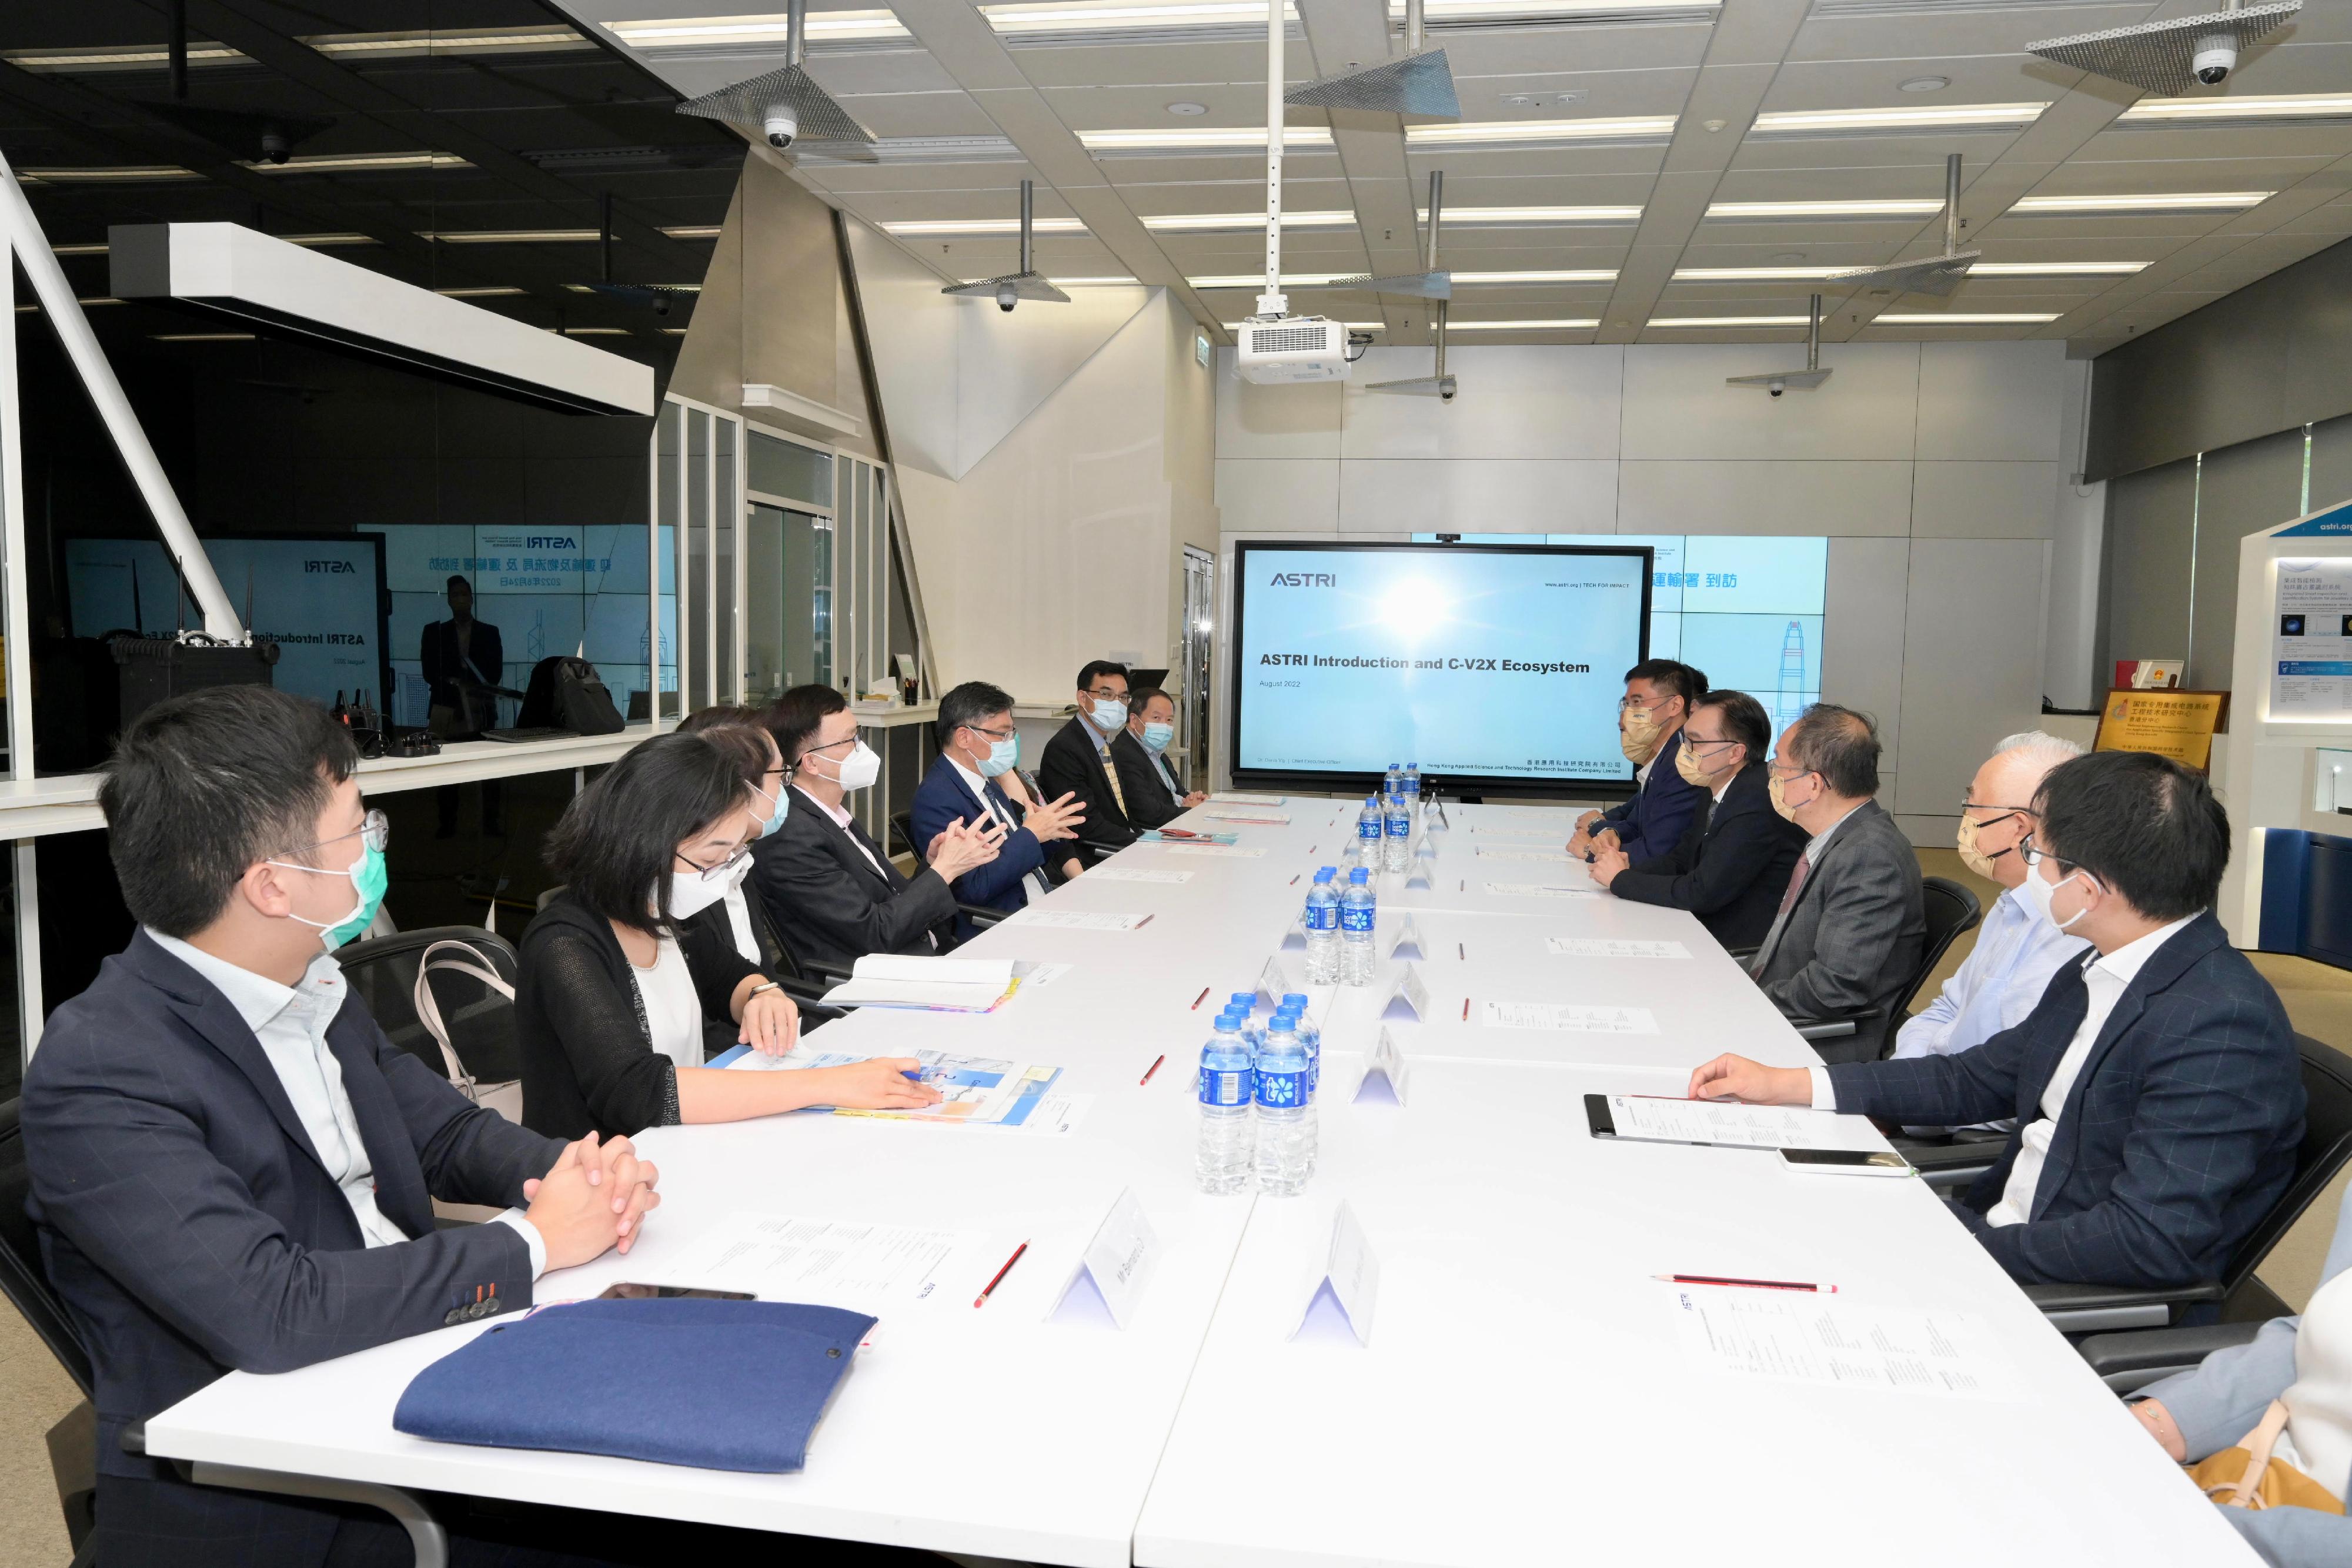 The Secretary for Transport and Logistics, Mr Lam Sai-hung, visited the Hong Kong Applied Science and Technology Research Institute Company Limited (ASTRI) at the Hong Kong Science Park today (August 24). Photo shows Mr Lam (fifth left), and the Under Secretary for Transport and Logistics, Mr Liu Chun-san (fourth left), receiving a briefing from ASTRI representatives on their research progress and achievements of C-V2X technology since 2016.